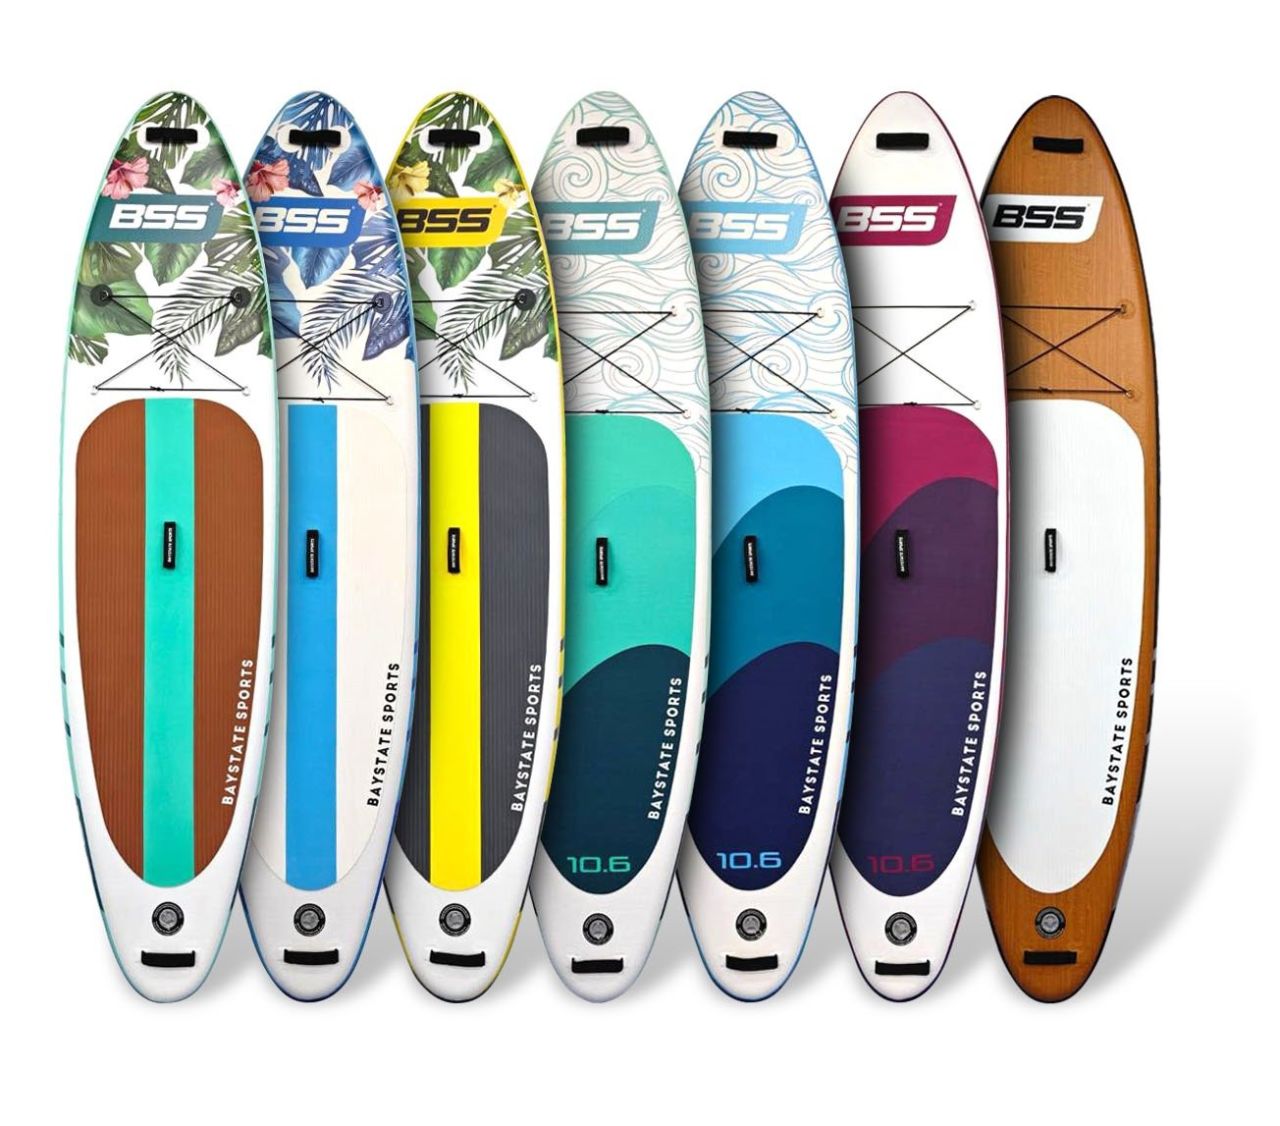 7 New BSS Inflatable Paddle Board Models 